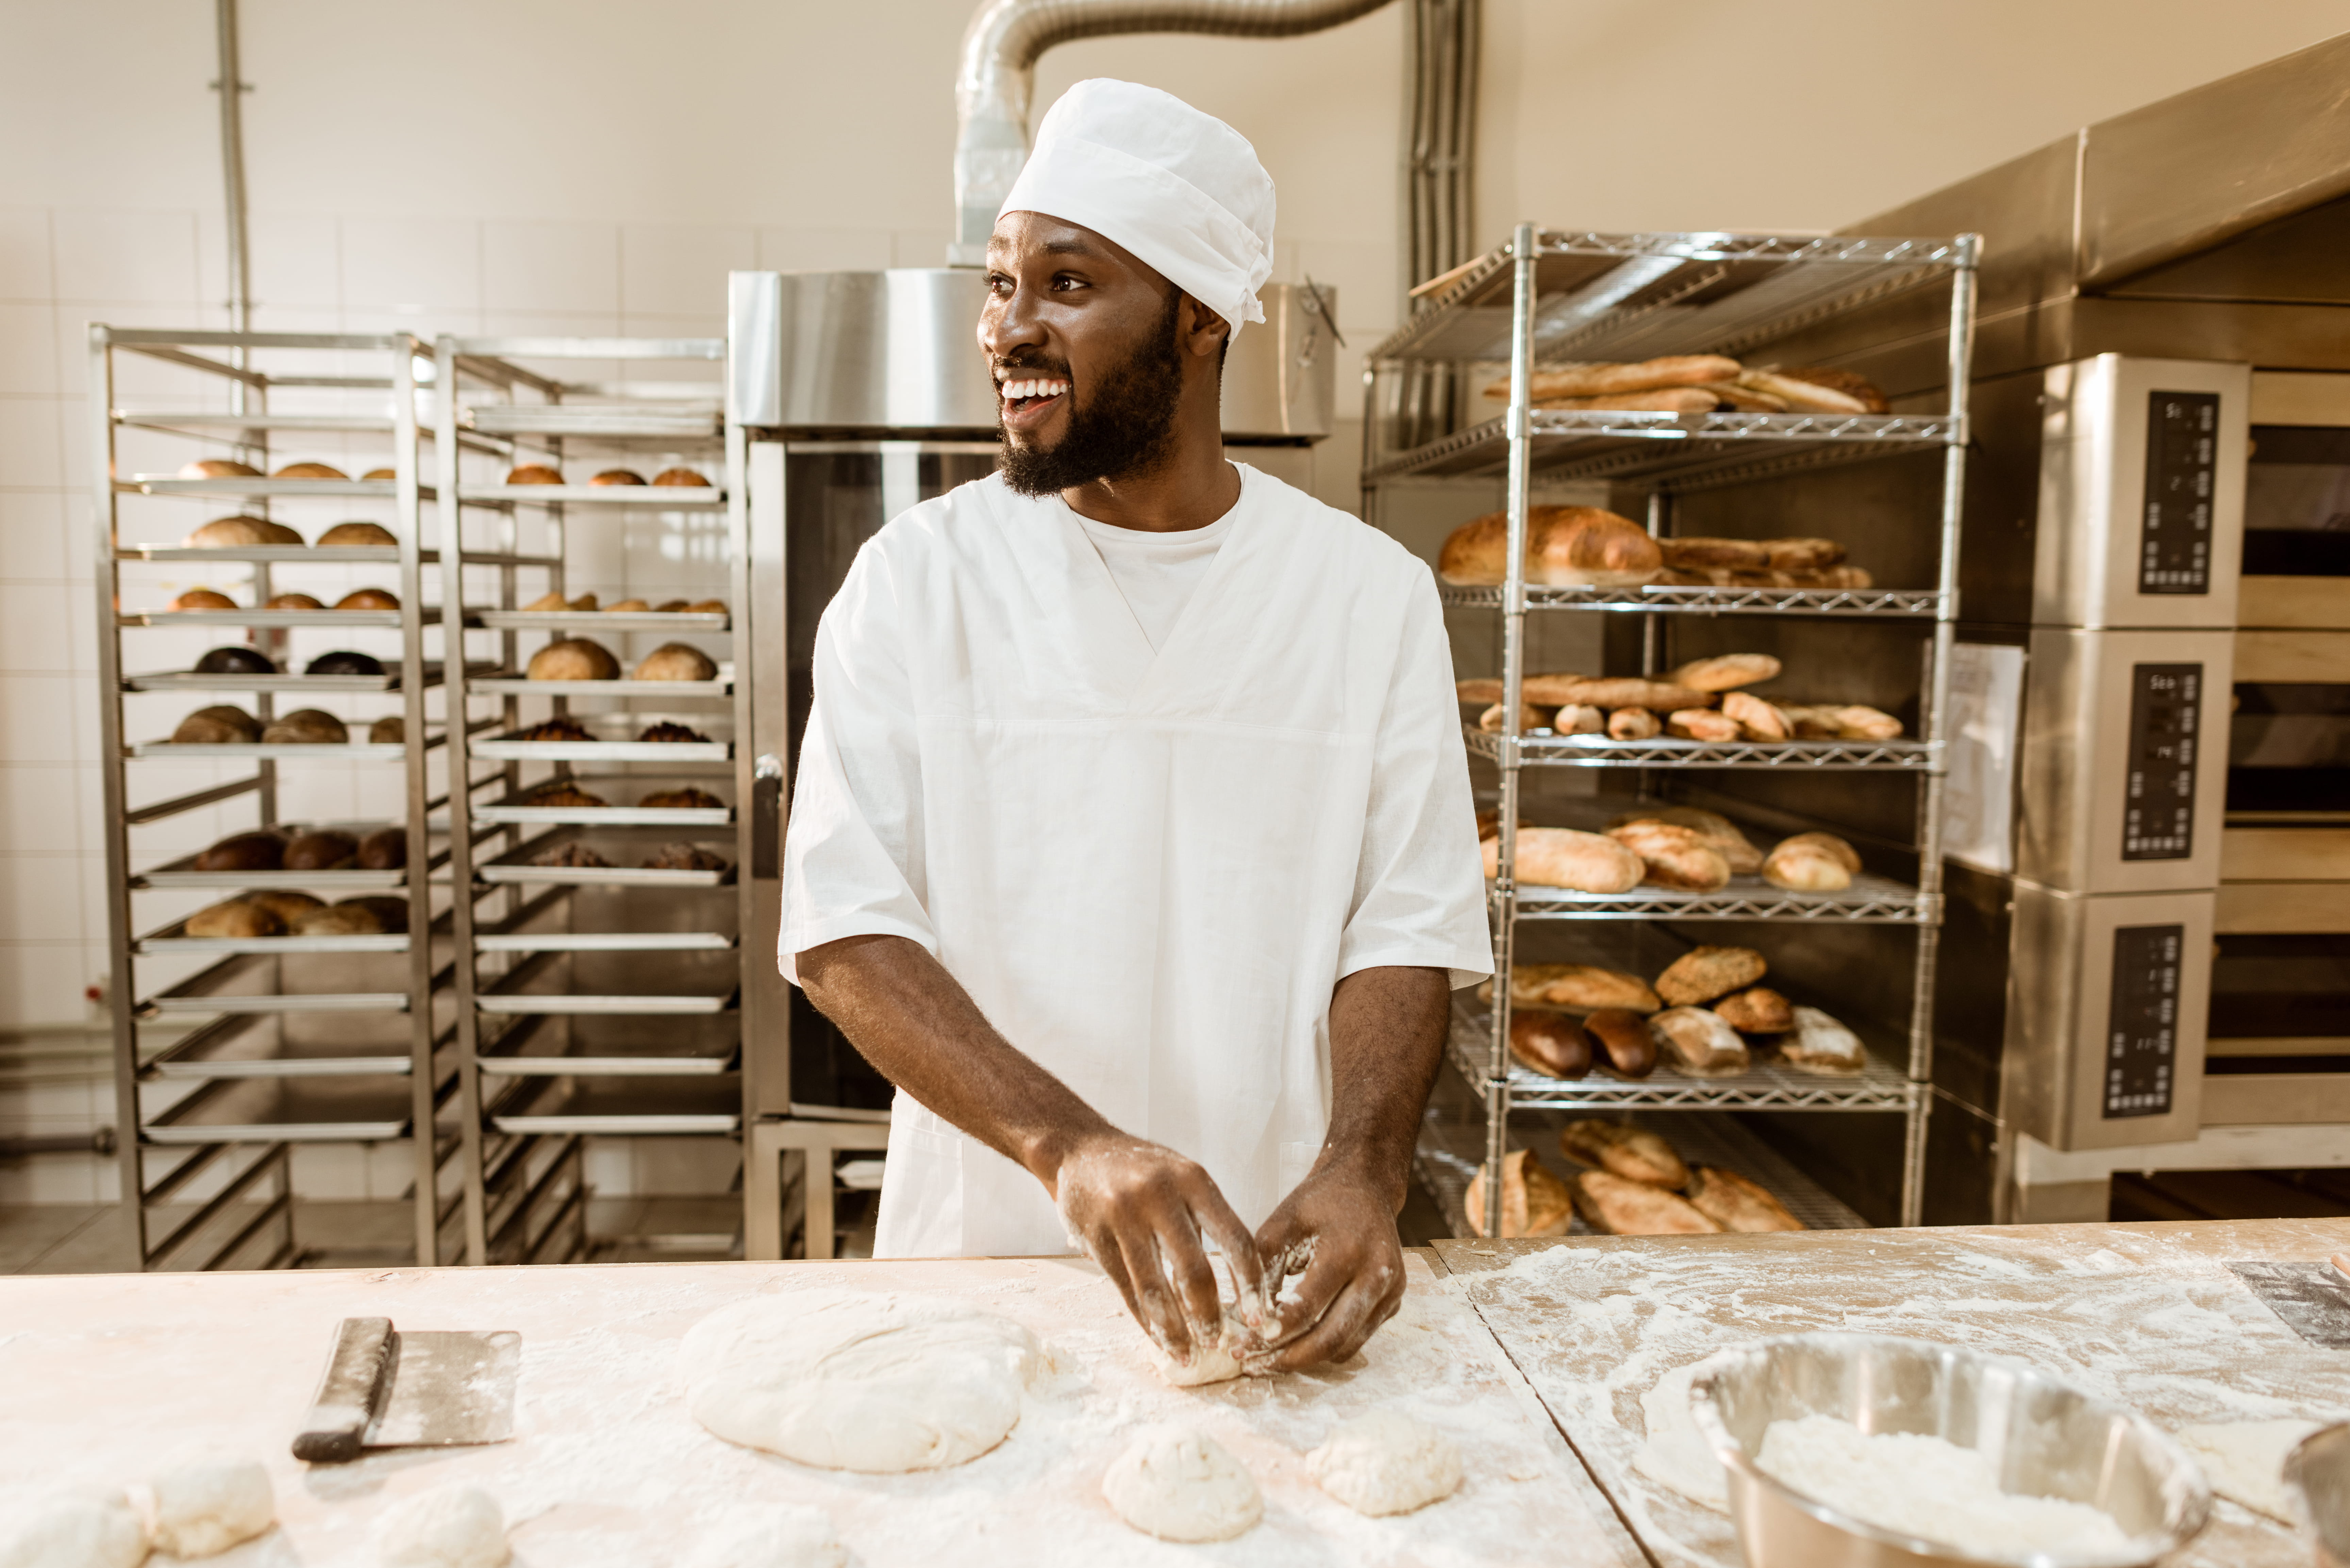 Baker in a white uniform and hat shaping dough on a floured surface in a bakery. Shelves behind are filled with various baked goods, including bread and pastries